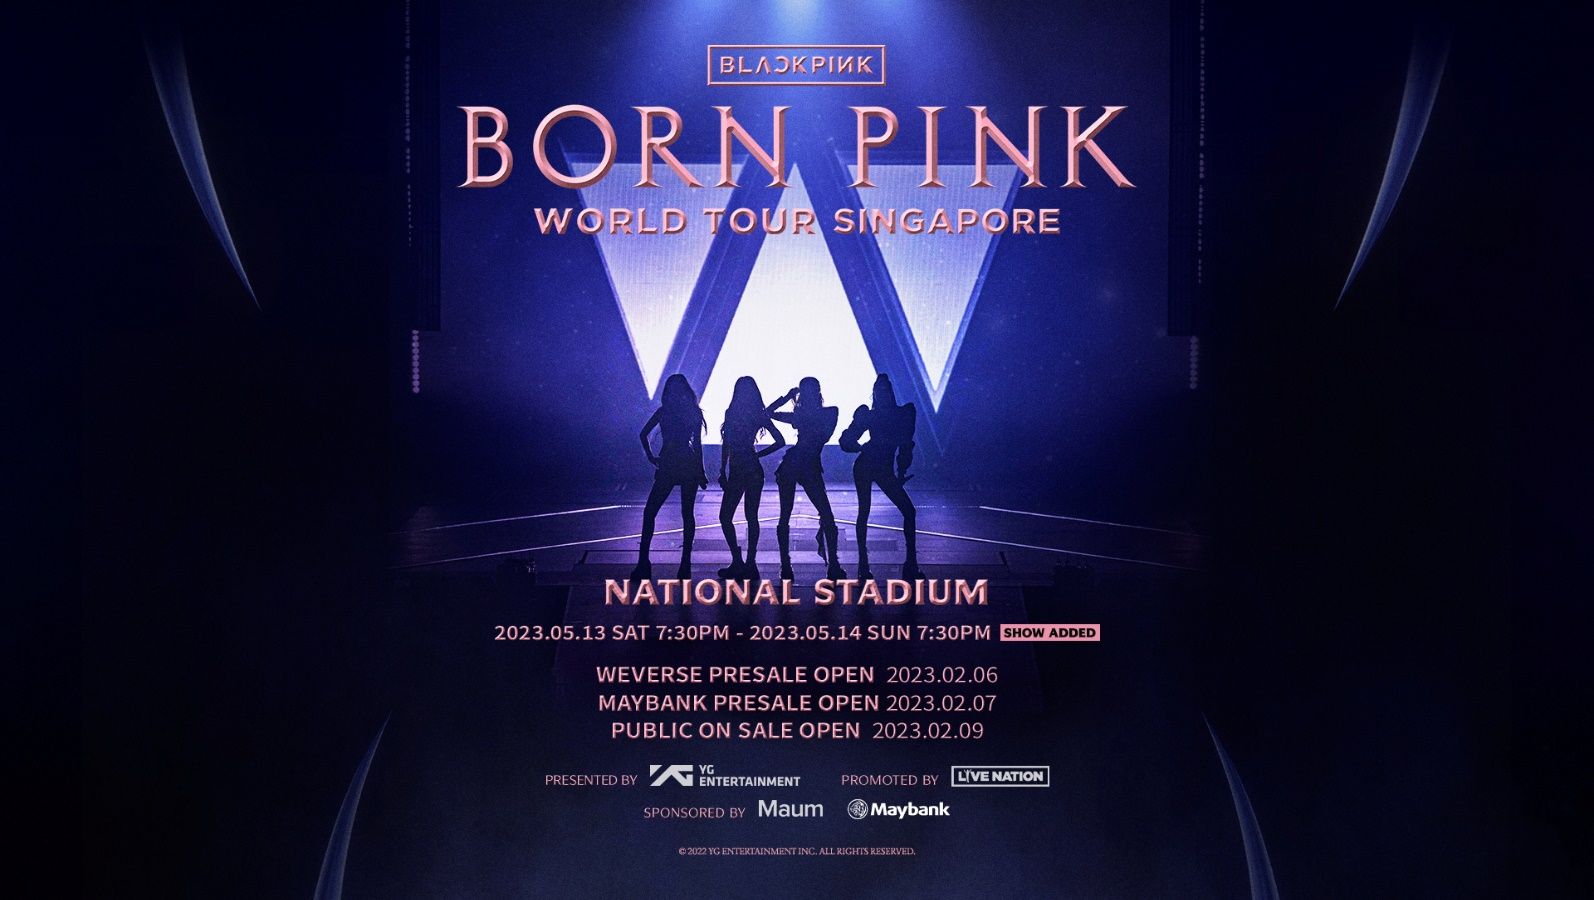 BLACKPINK adds second show in SG for their 'Born Pink' Asia tour